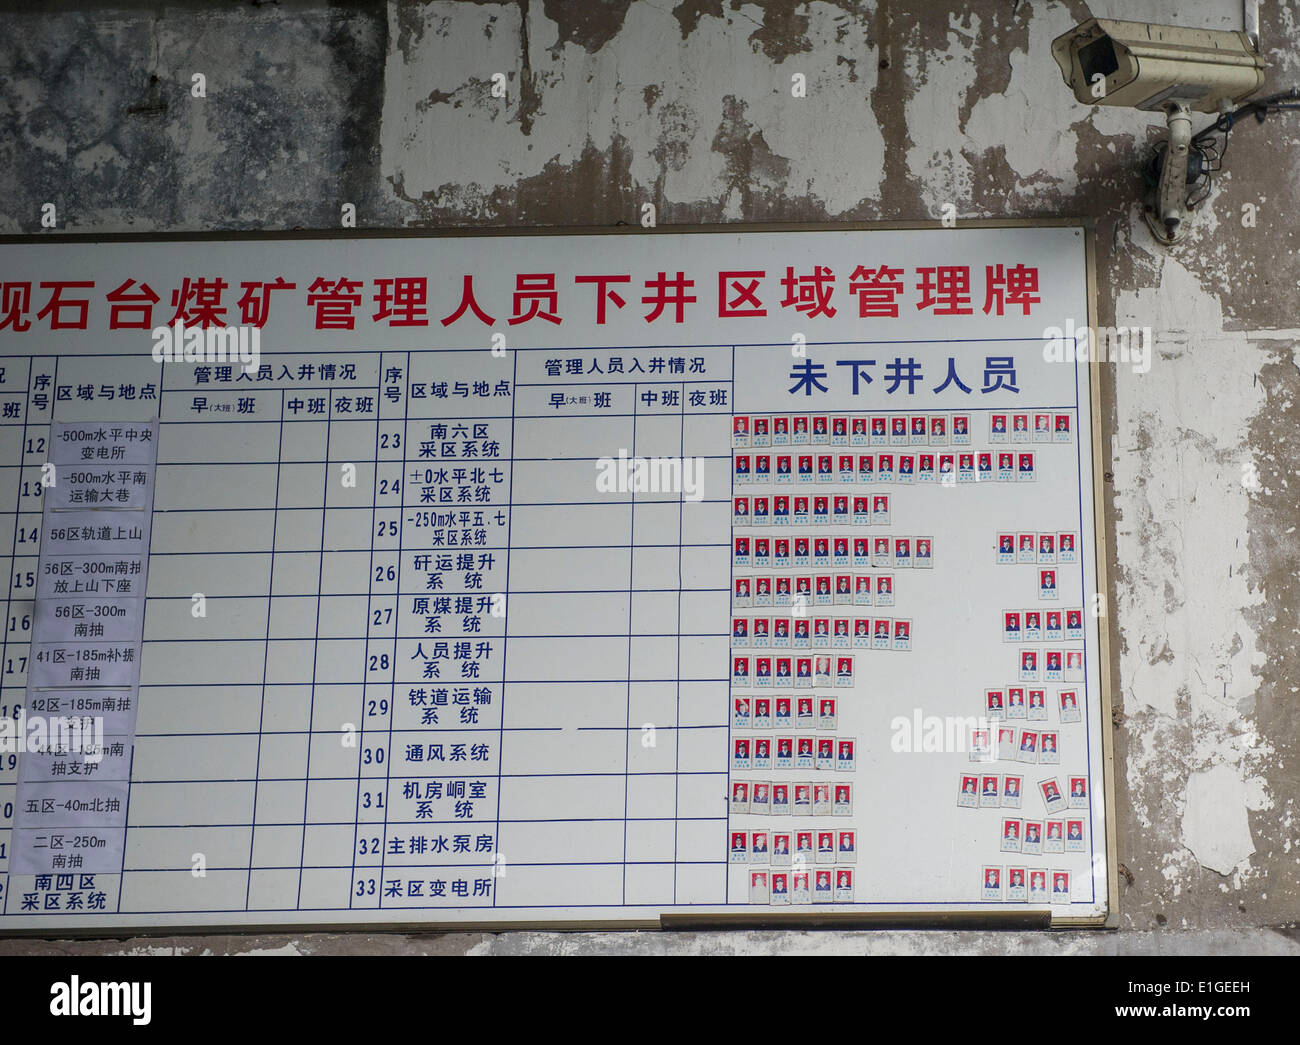 (140604) -- CHONGQING, June 4, 2014 (Xinhua) -- Photo taken on June 4, 2014 shows the management board of the coal mine in which an accident claimed 22 lives in Chongqing, southwest China. Twenty-two people are confirmed dead in a gas incident which happened at 5:40 p.m.Tuesday at the Yanshitai Coal Mine in Wansheng District. Rescuers have retrieved the bodies of all the missing miners, the authorities said. A total of 28 miners were working down the shaft at the time of the accident. Six of them managed to escape, with two injured in the process. The coal mine belongs to the state-owned Nanto Stock Photo